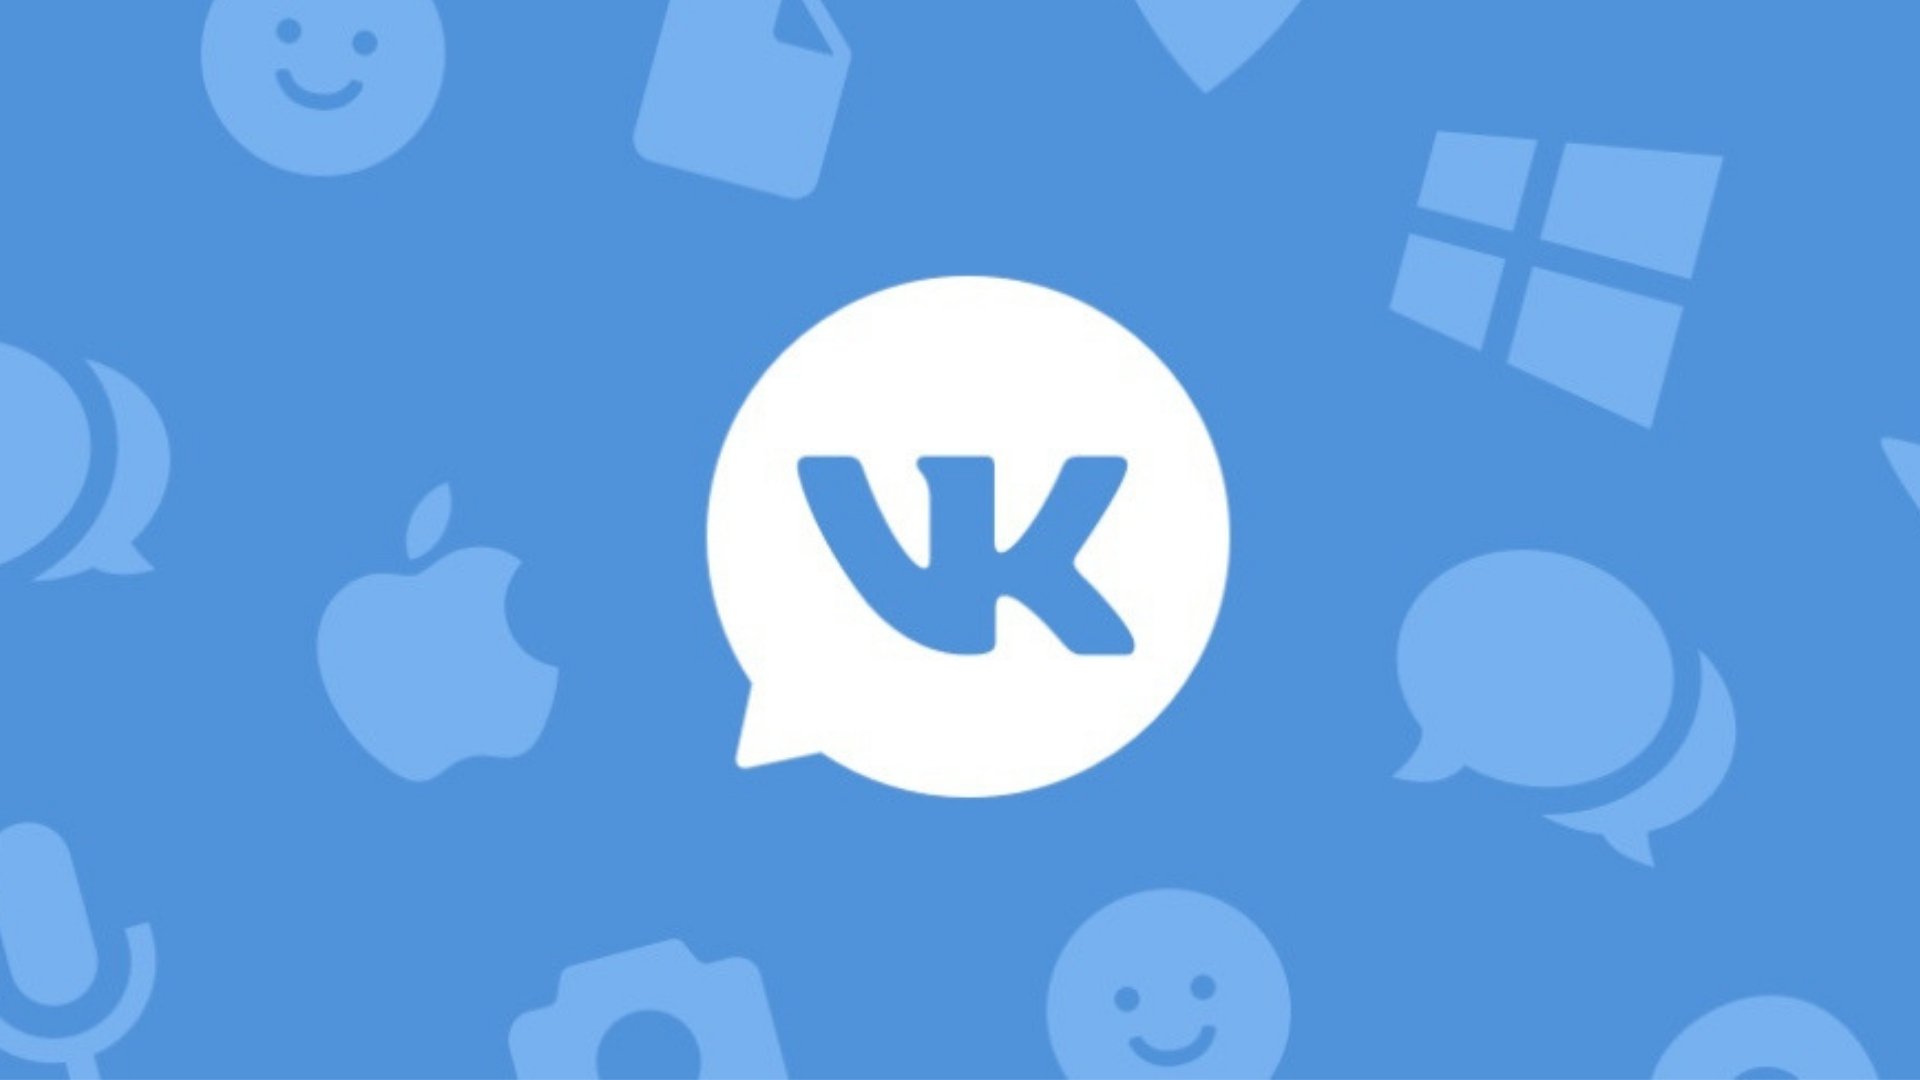 VKontakte has increased the speed of content delivery to PCs and mobile devices